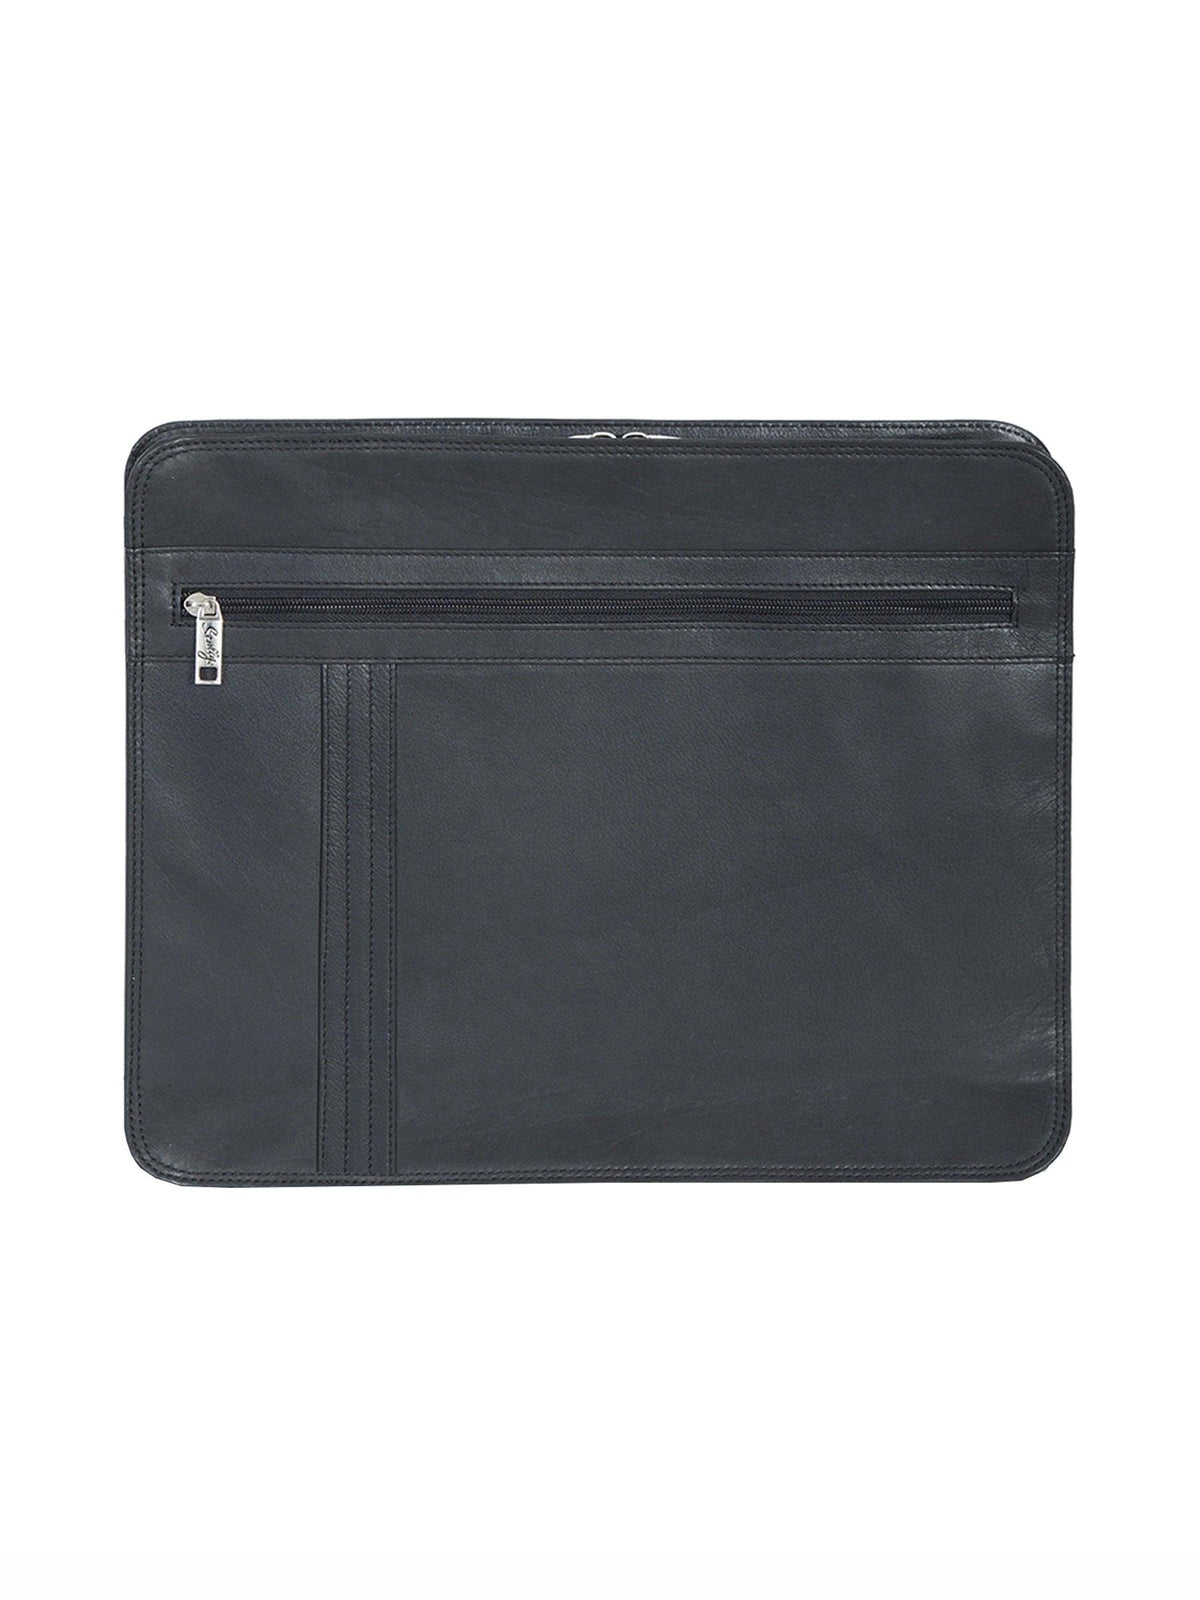 Scully Leather 3 way zip envelope - Flyclothing LLC